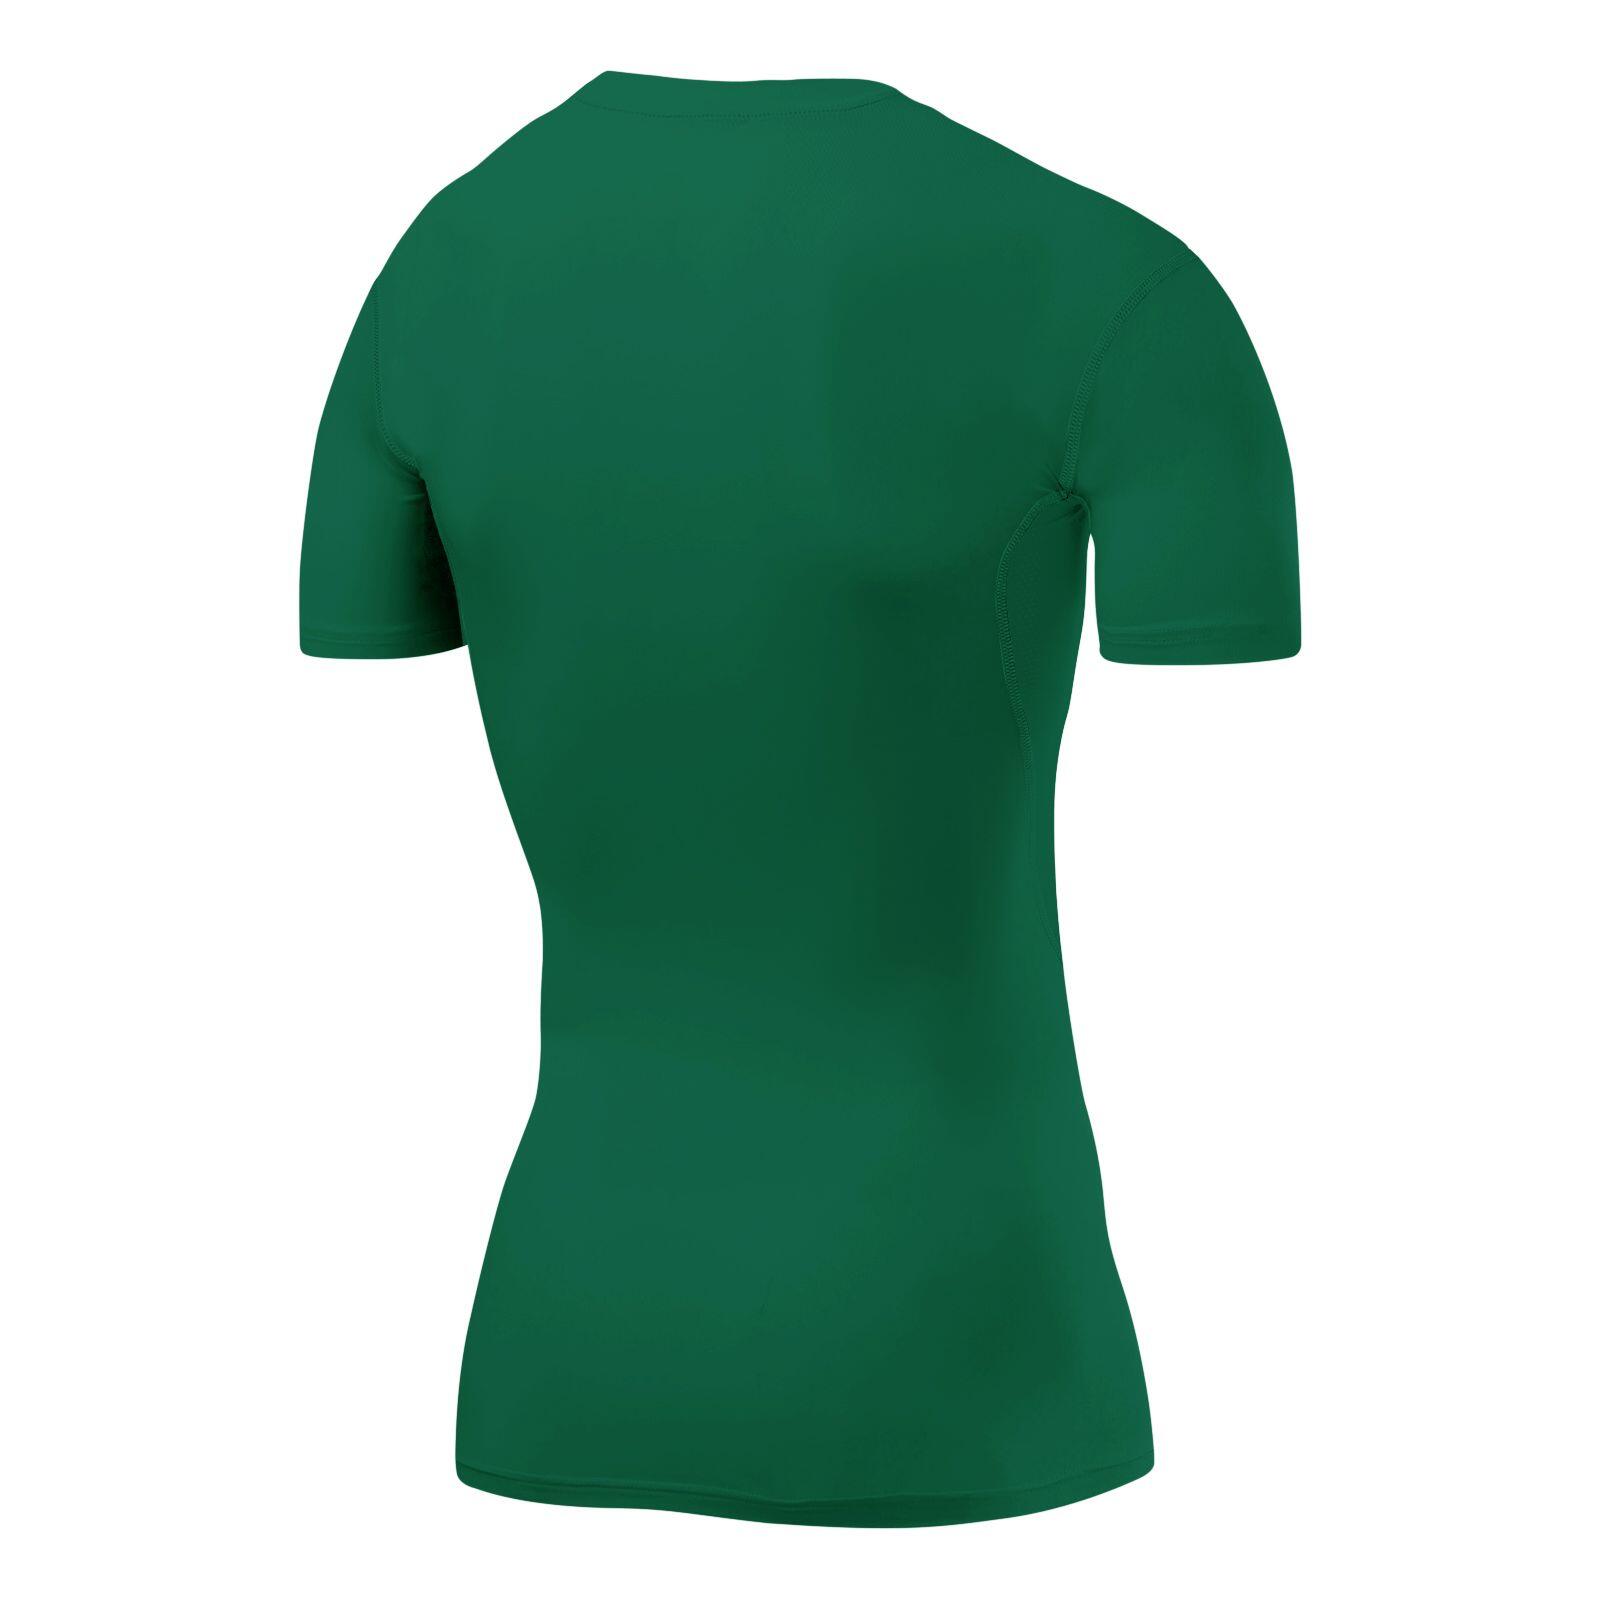 Men's HyperFusion Breathable Base Layer Compression T-shirt - Cadmium Green 3/5